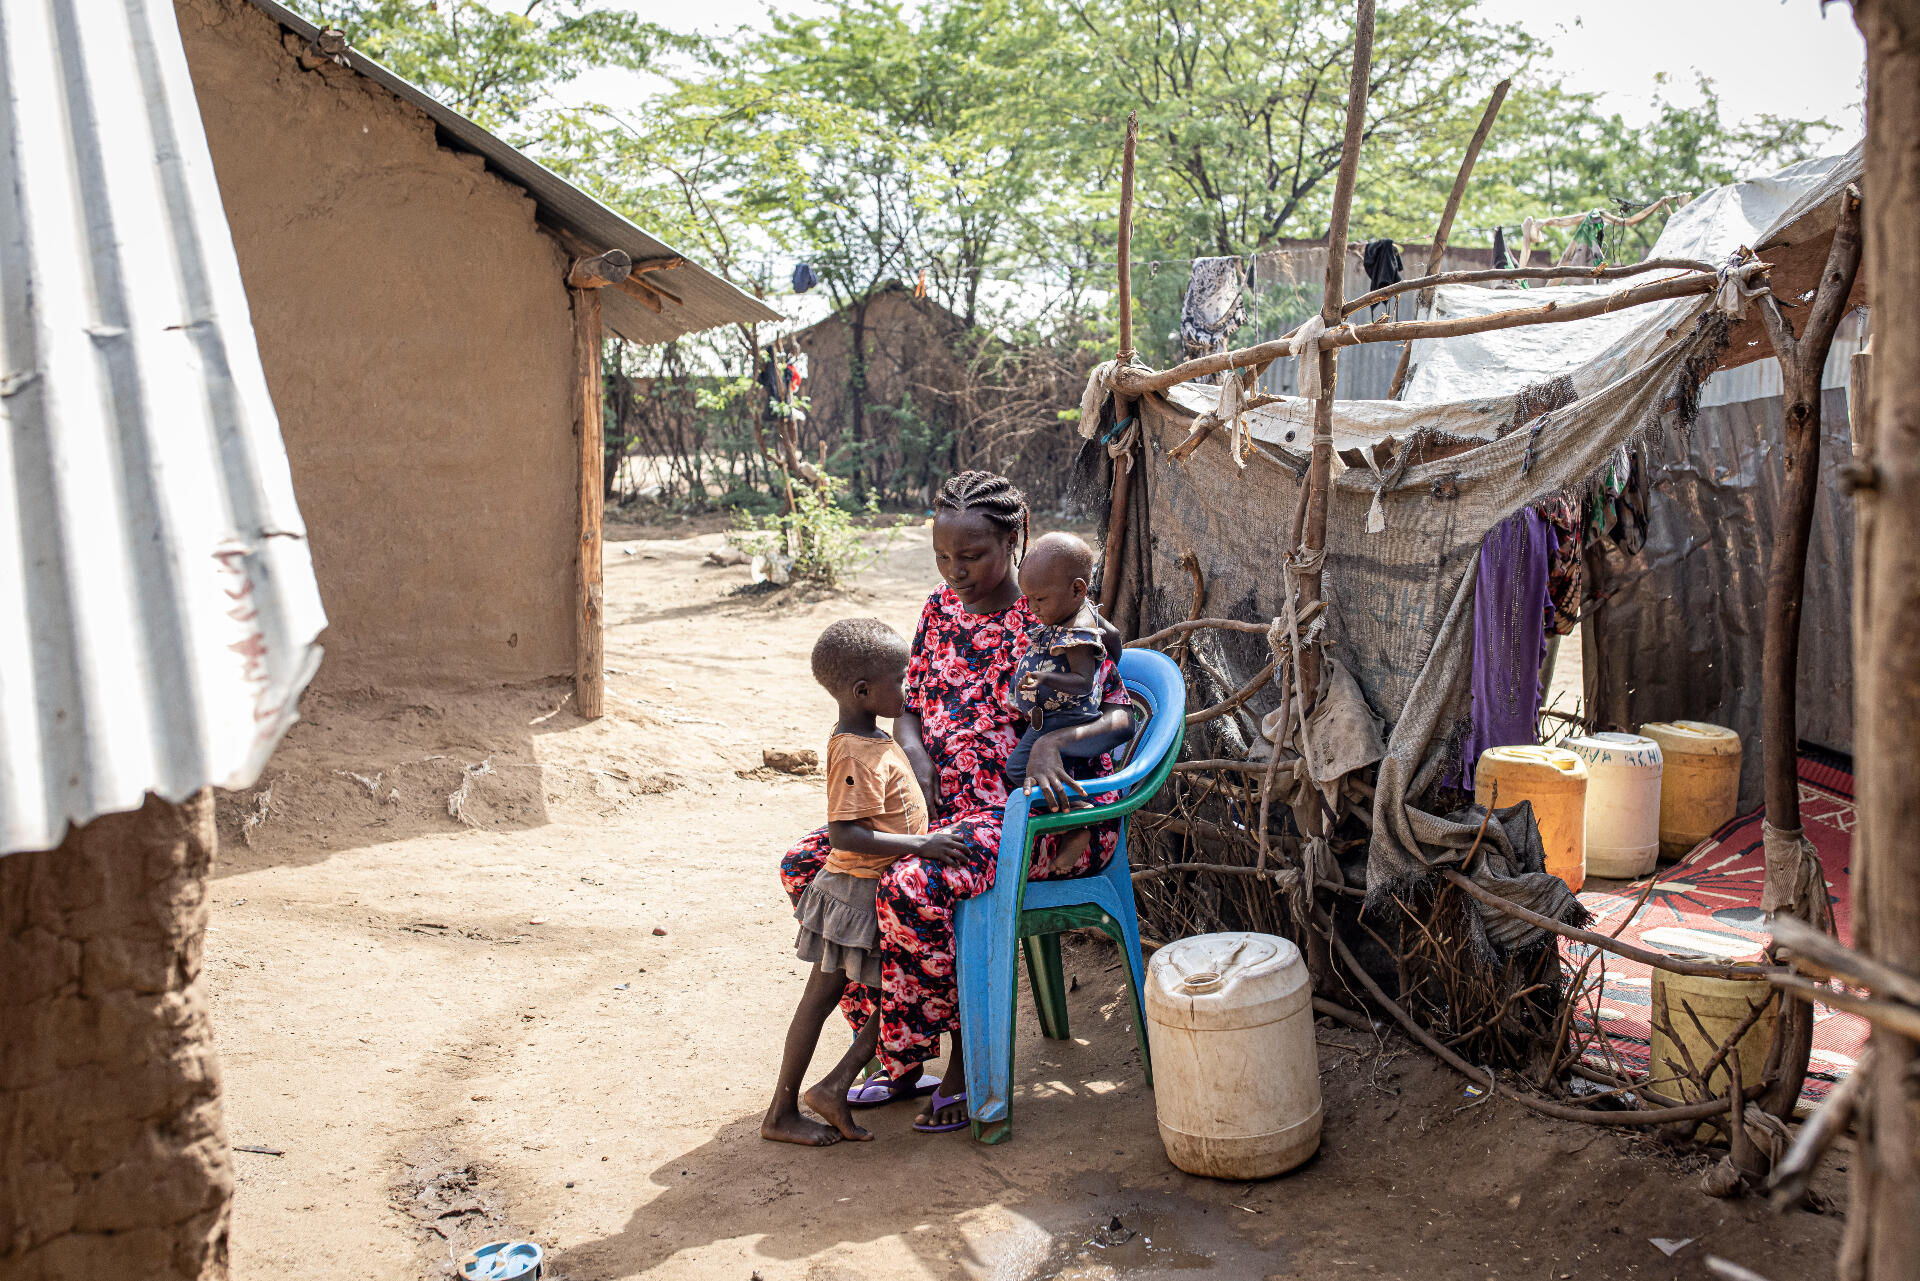 Judith, who has been living in a Kenyan refugee camp since 1998 sits with her two children and explains how drought has made life more difficult.